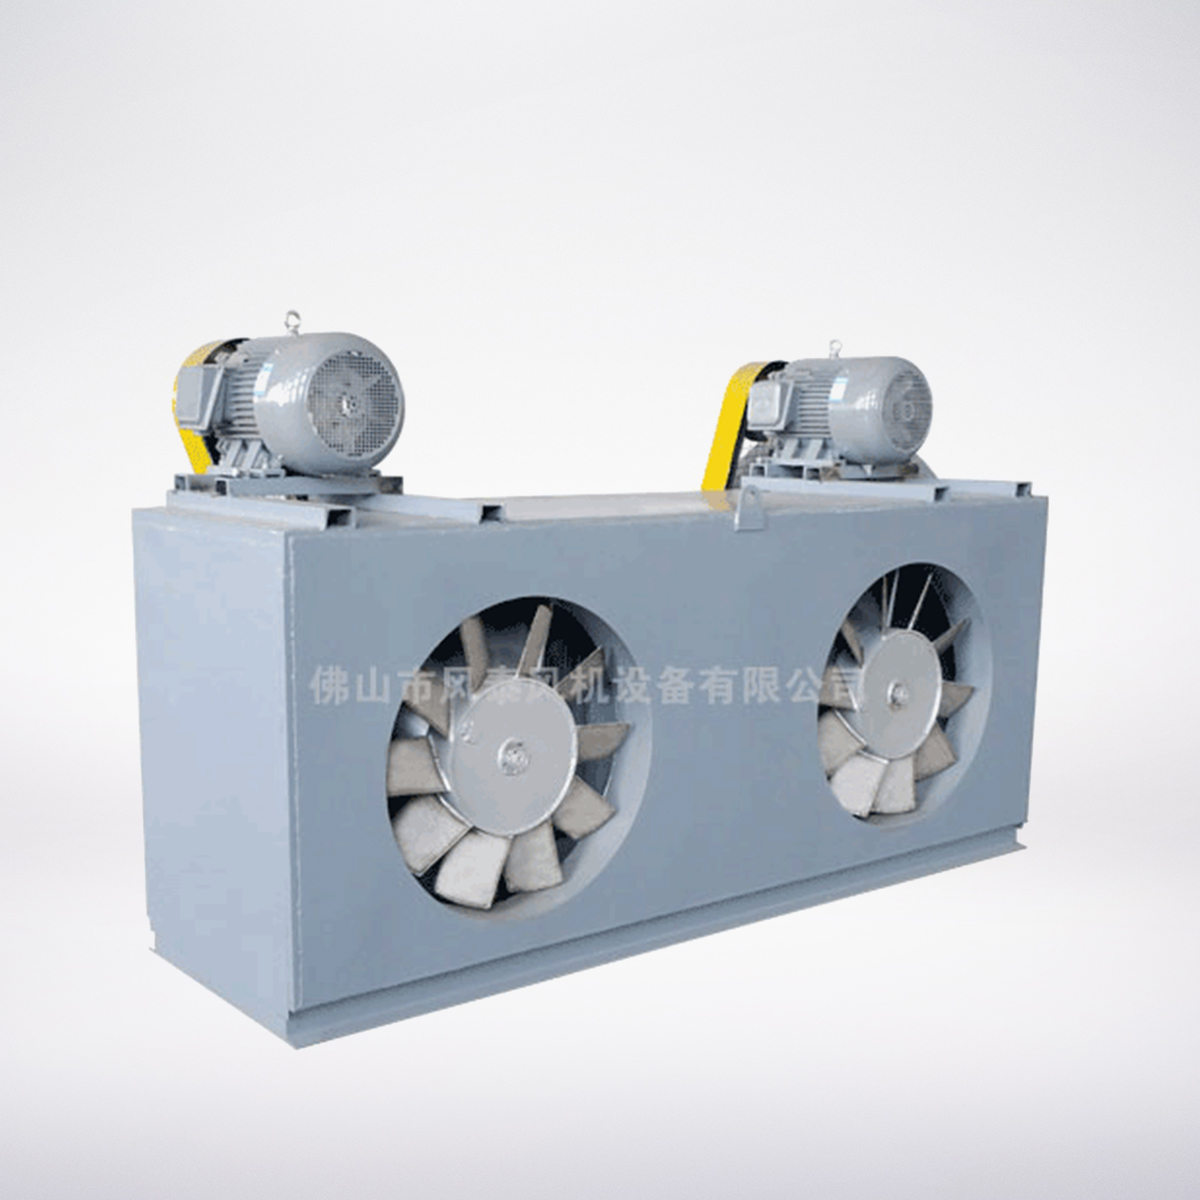 Forward and reverse rotating double leaf axial flow fan for ageing fan